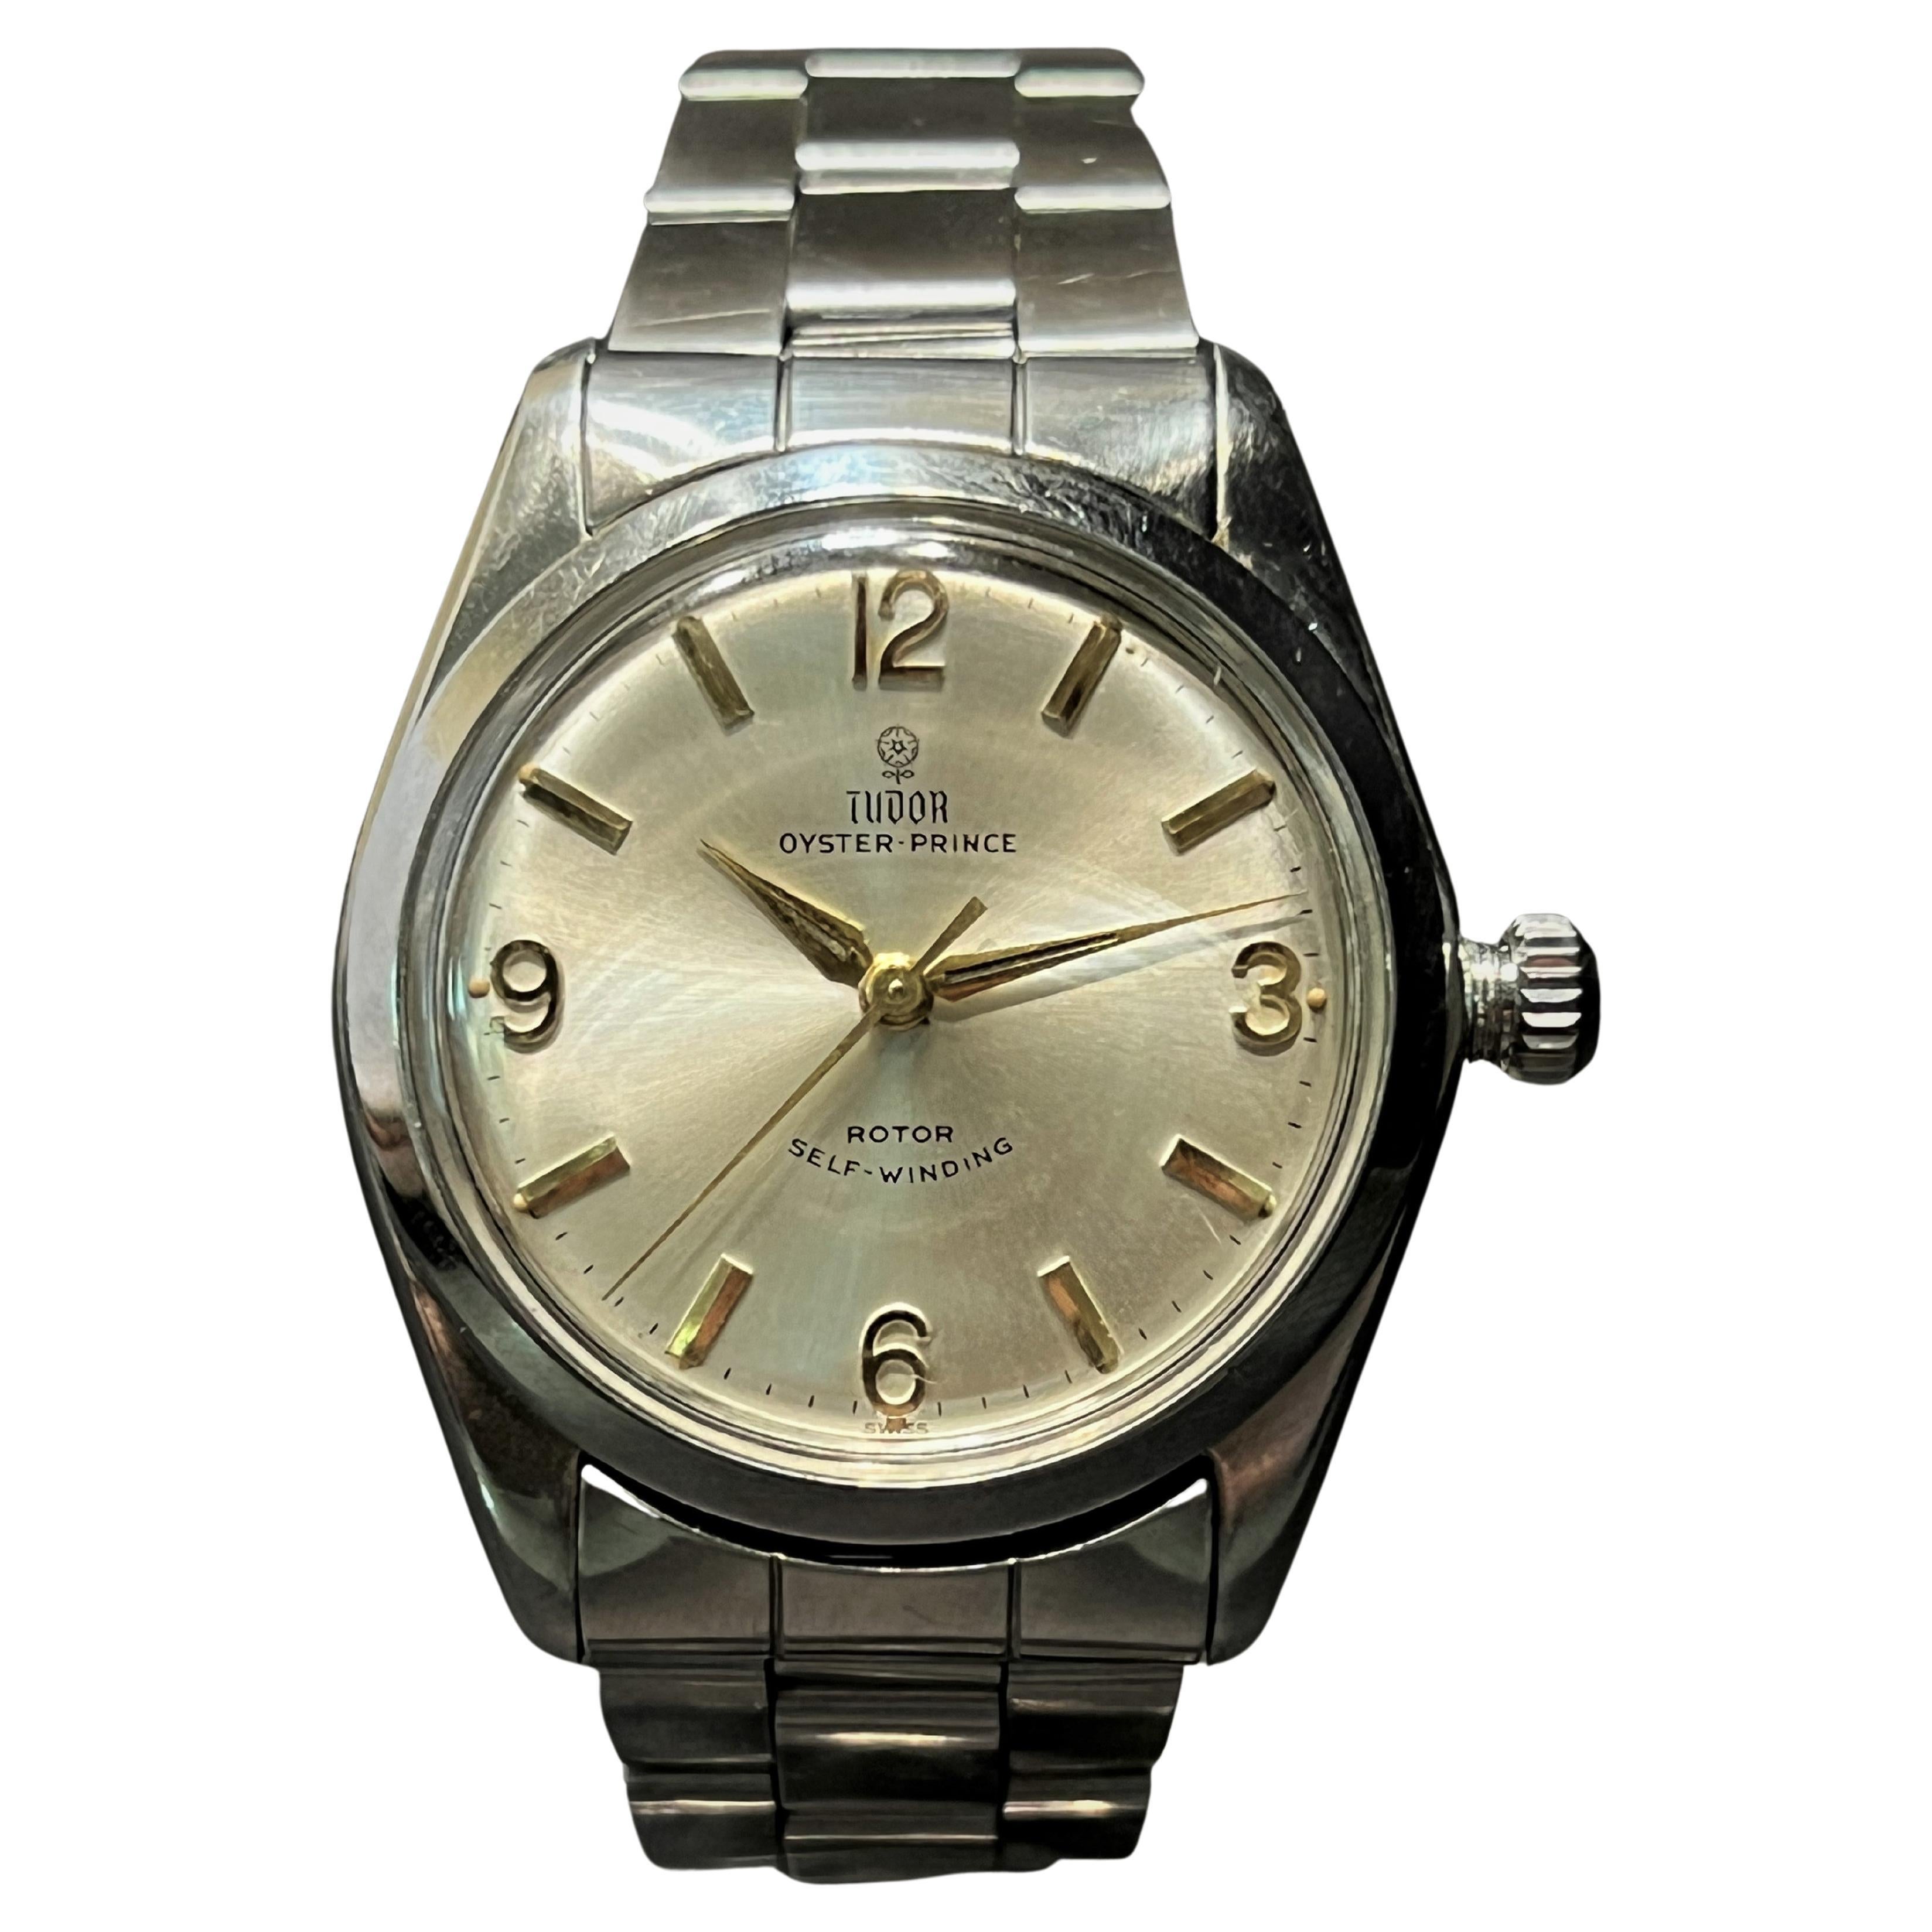 1968 Rolex Tudor Oyster Prince Stainless Watch For Sale